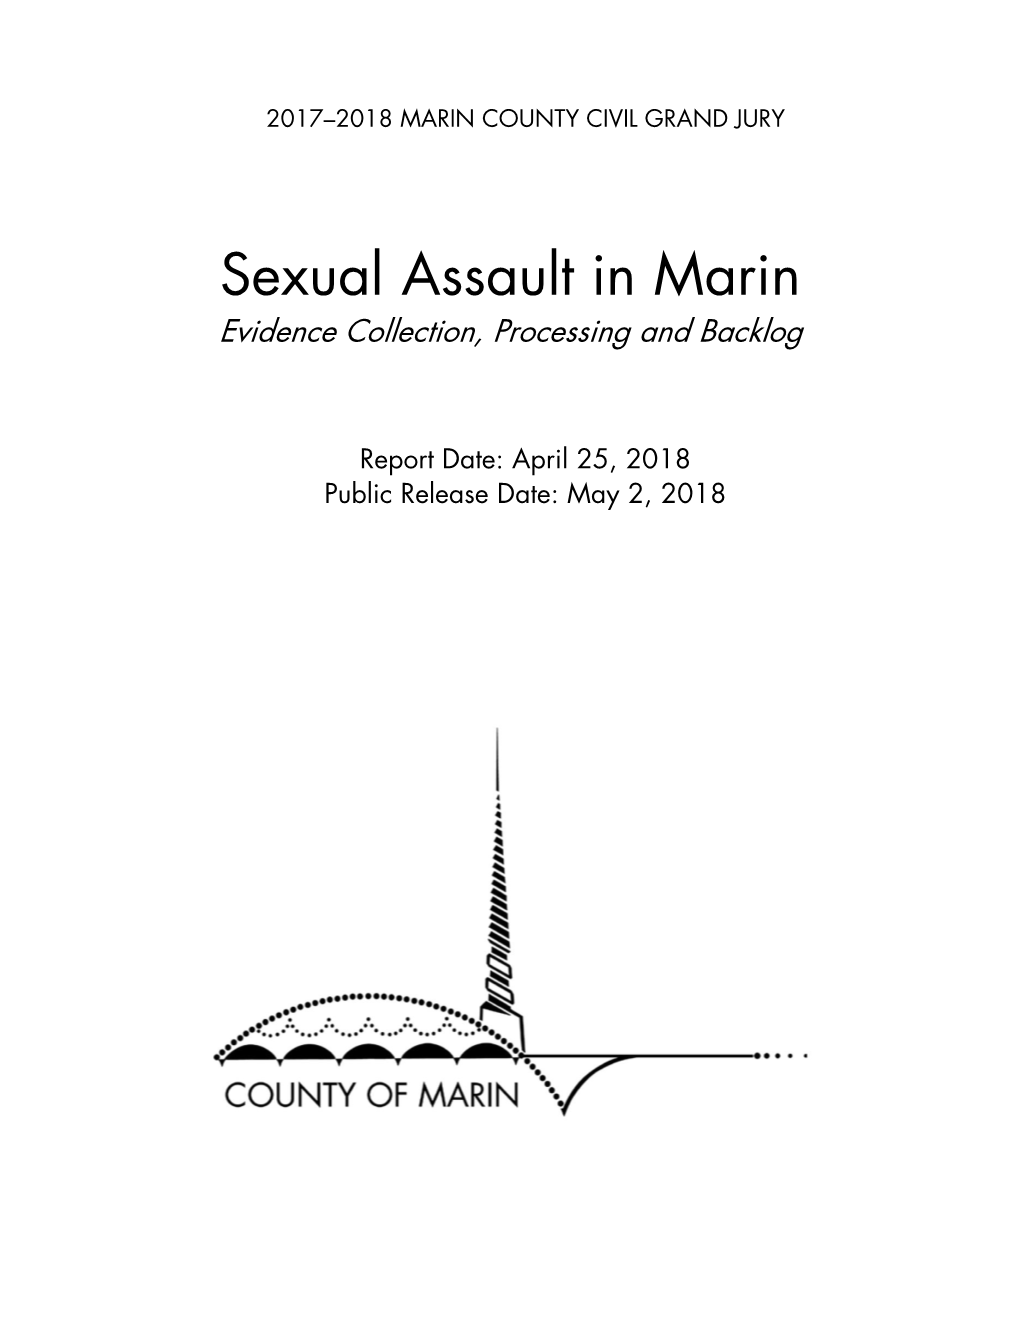 Sexual Assault in Marin: Evidence Collection, Processing and Backlog SUMMARY Recent News Reports Have Emphasized the Importance of DNA Analysis After a Sexual Assault